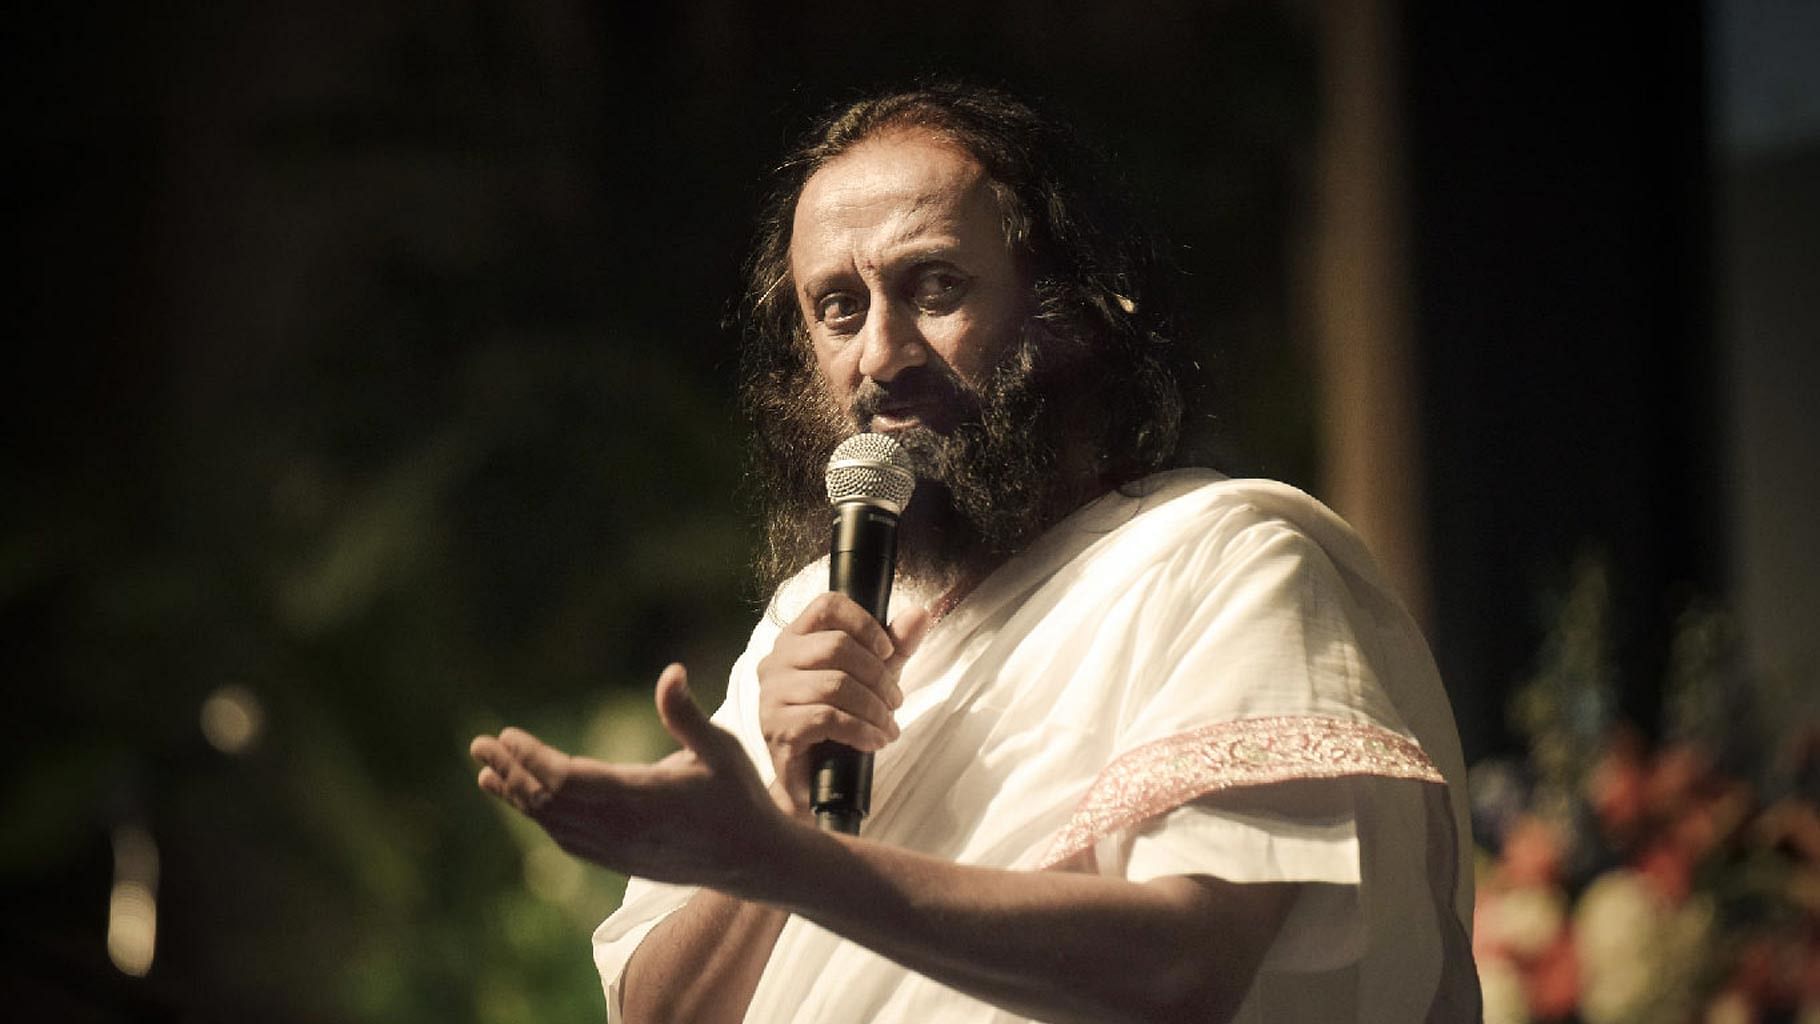 

The NGT has given AOL time till Friday to pay the Rs 5 crore fine, failing which the law will take its course. (Photo Courtesy: <a href="http://srisriravishankar.org/">srisriravishankar.org</a>)